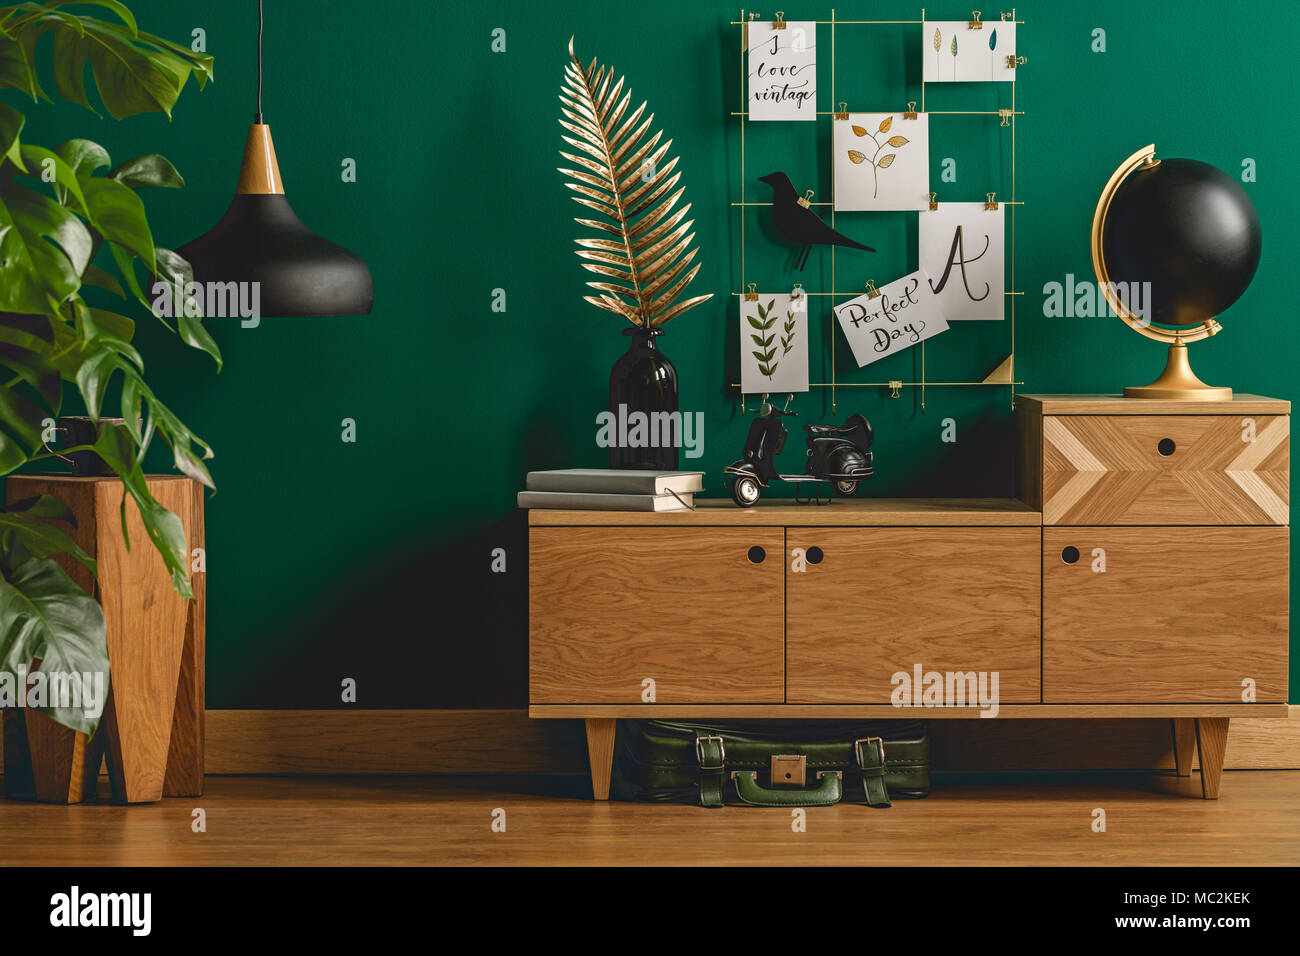 Dark green apartment interior with scandinavian style wooden furniture and designer black and gold decorations Stock Photo